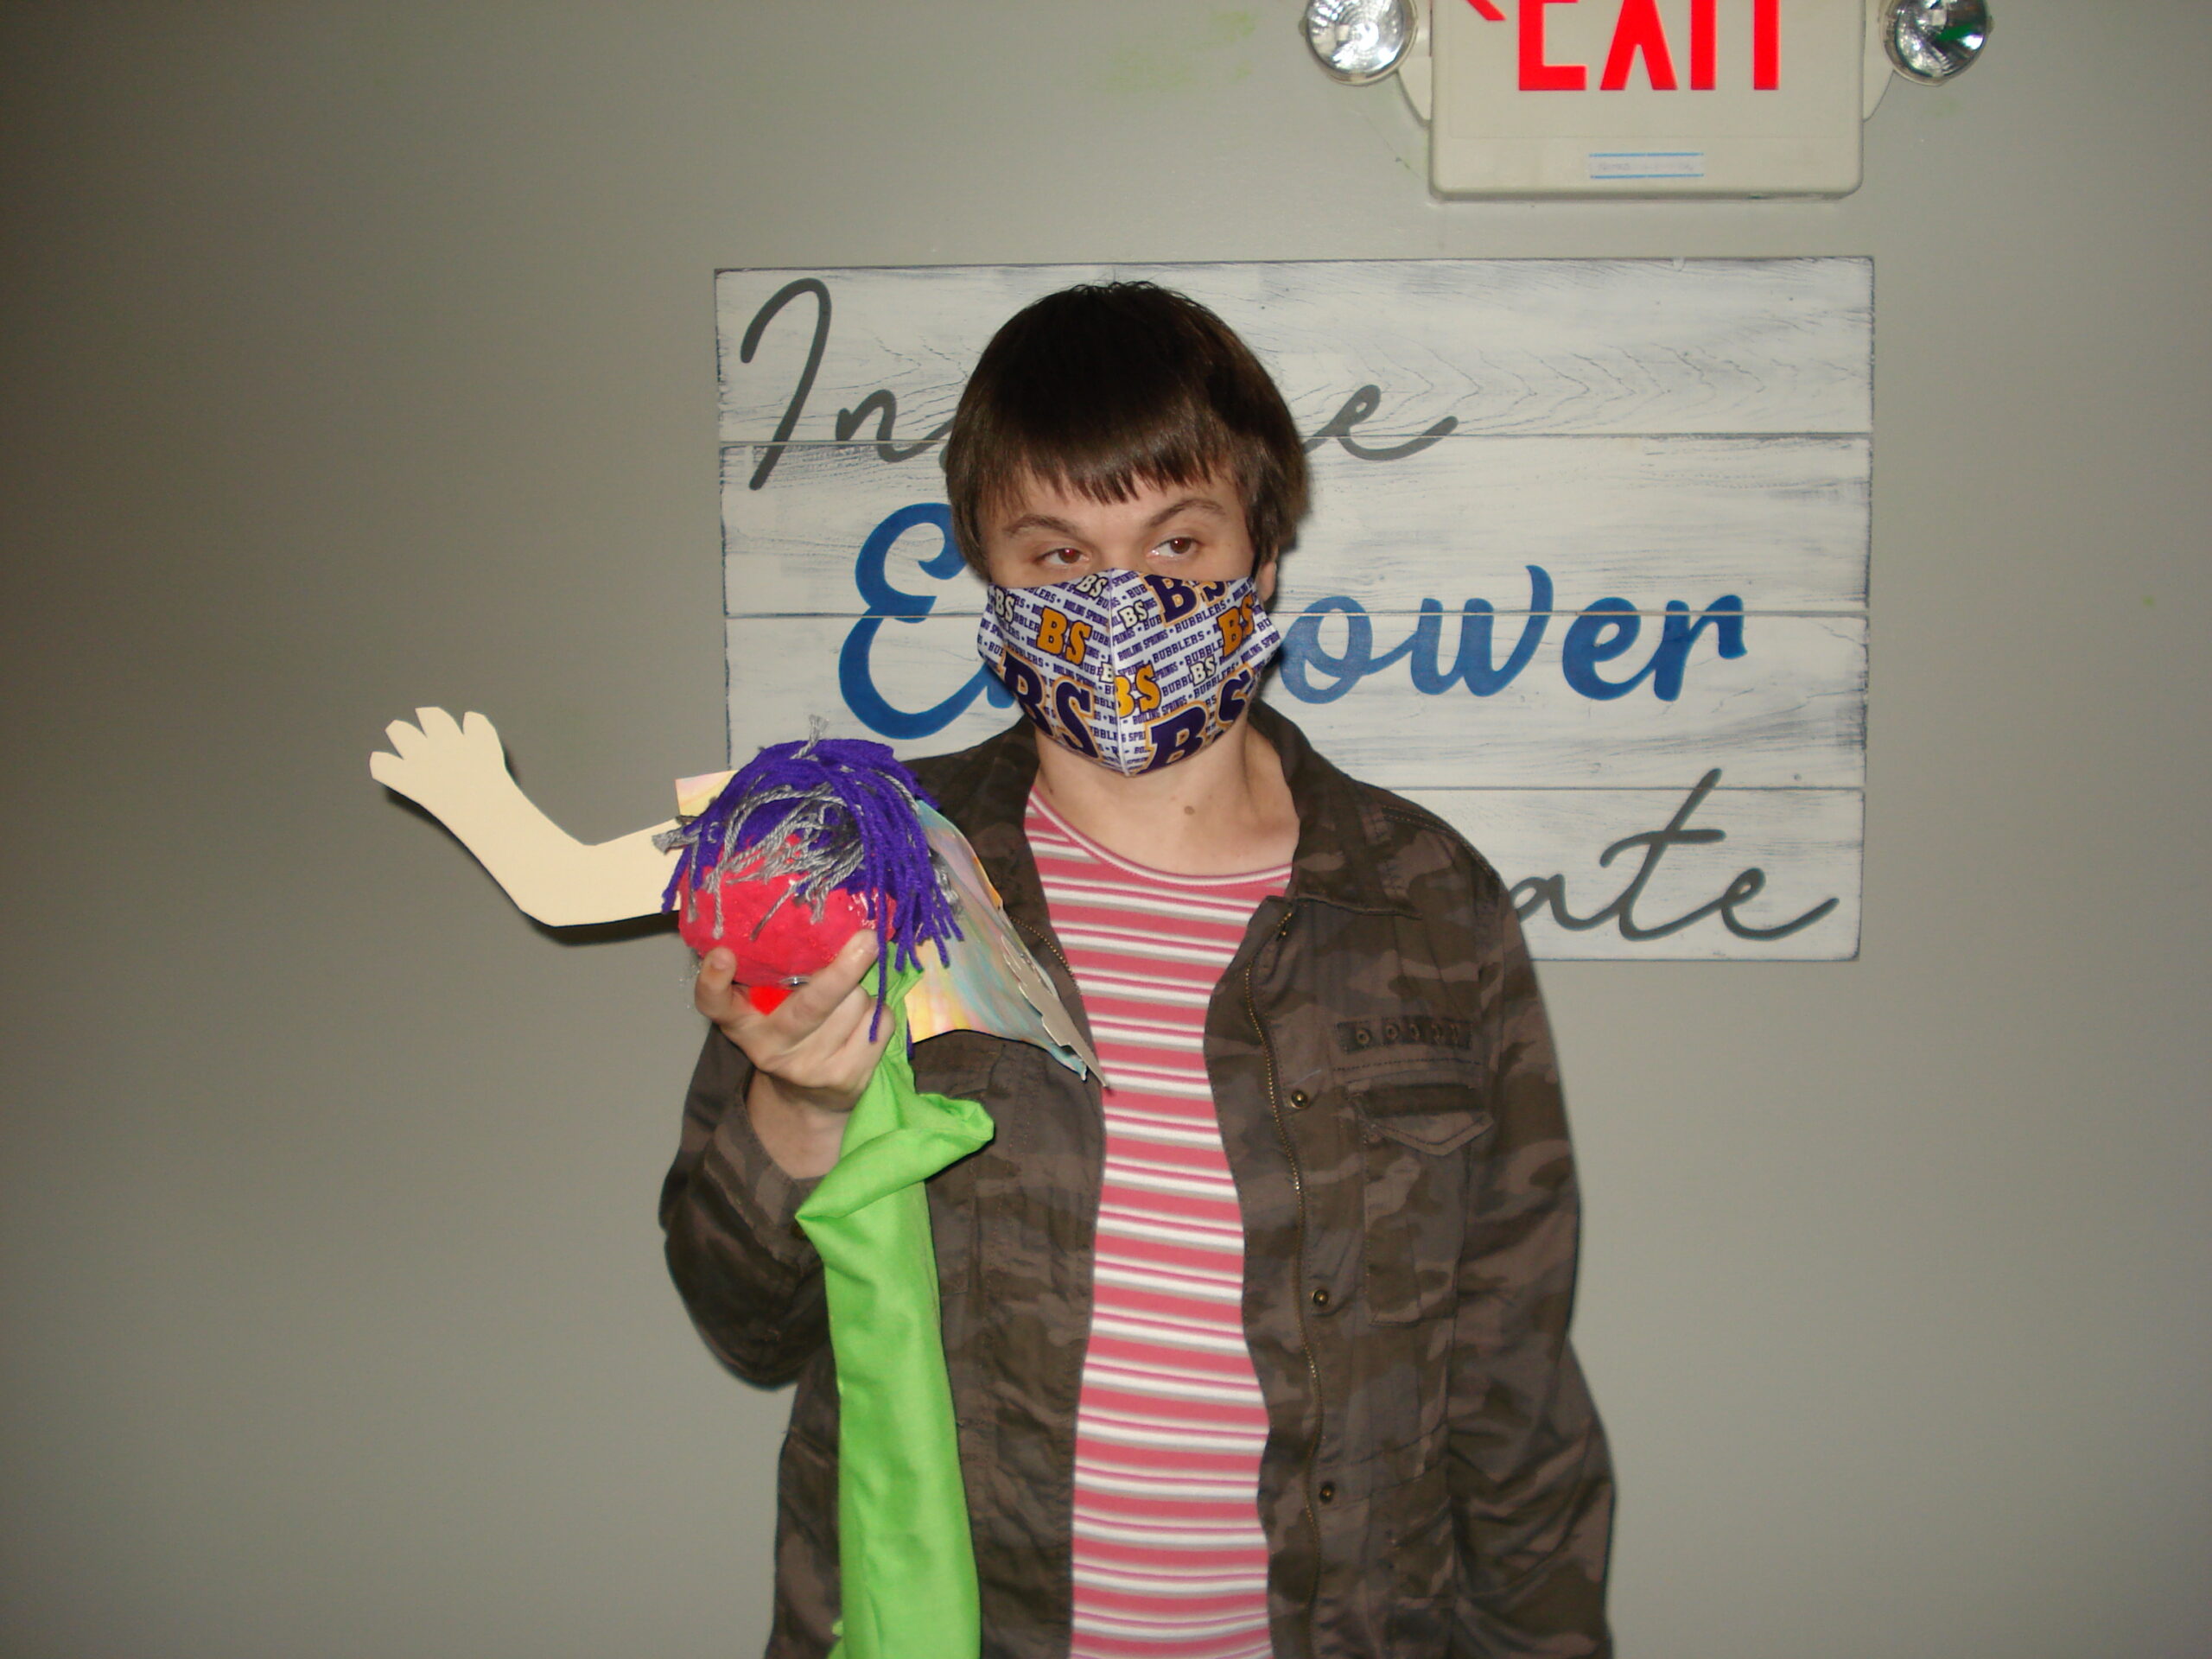 Photograph of a person holding a puppet that was made in an art class. the puppet has a green sleeve with a hand popping out of it